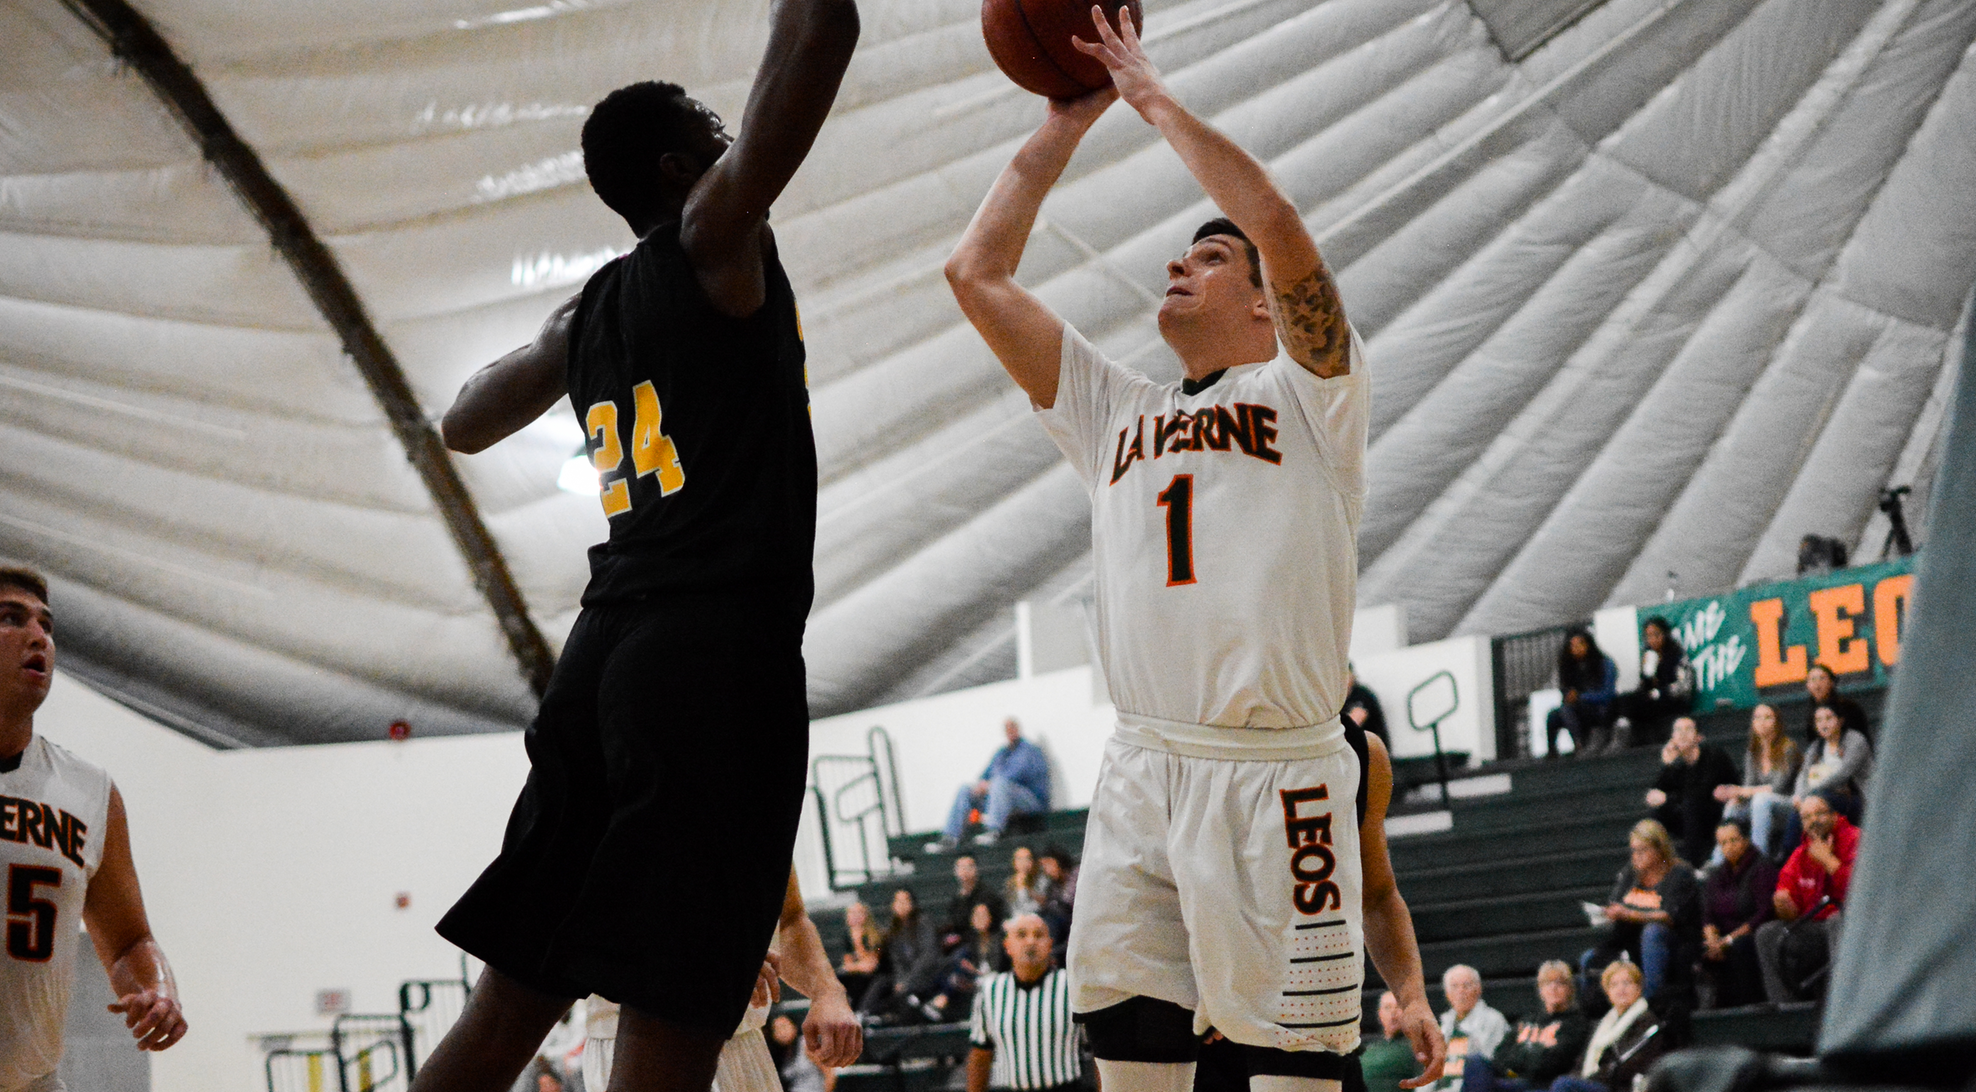 Men's Basketball edged by Linfield